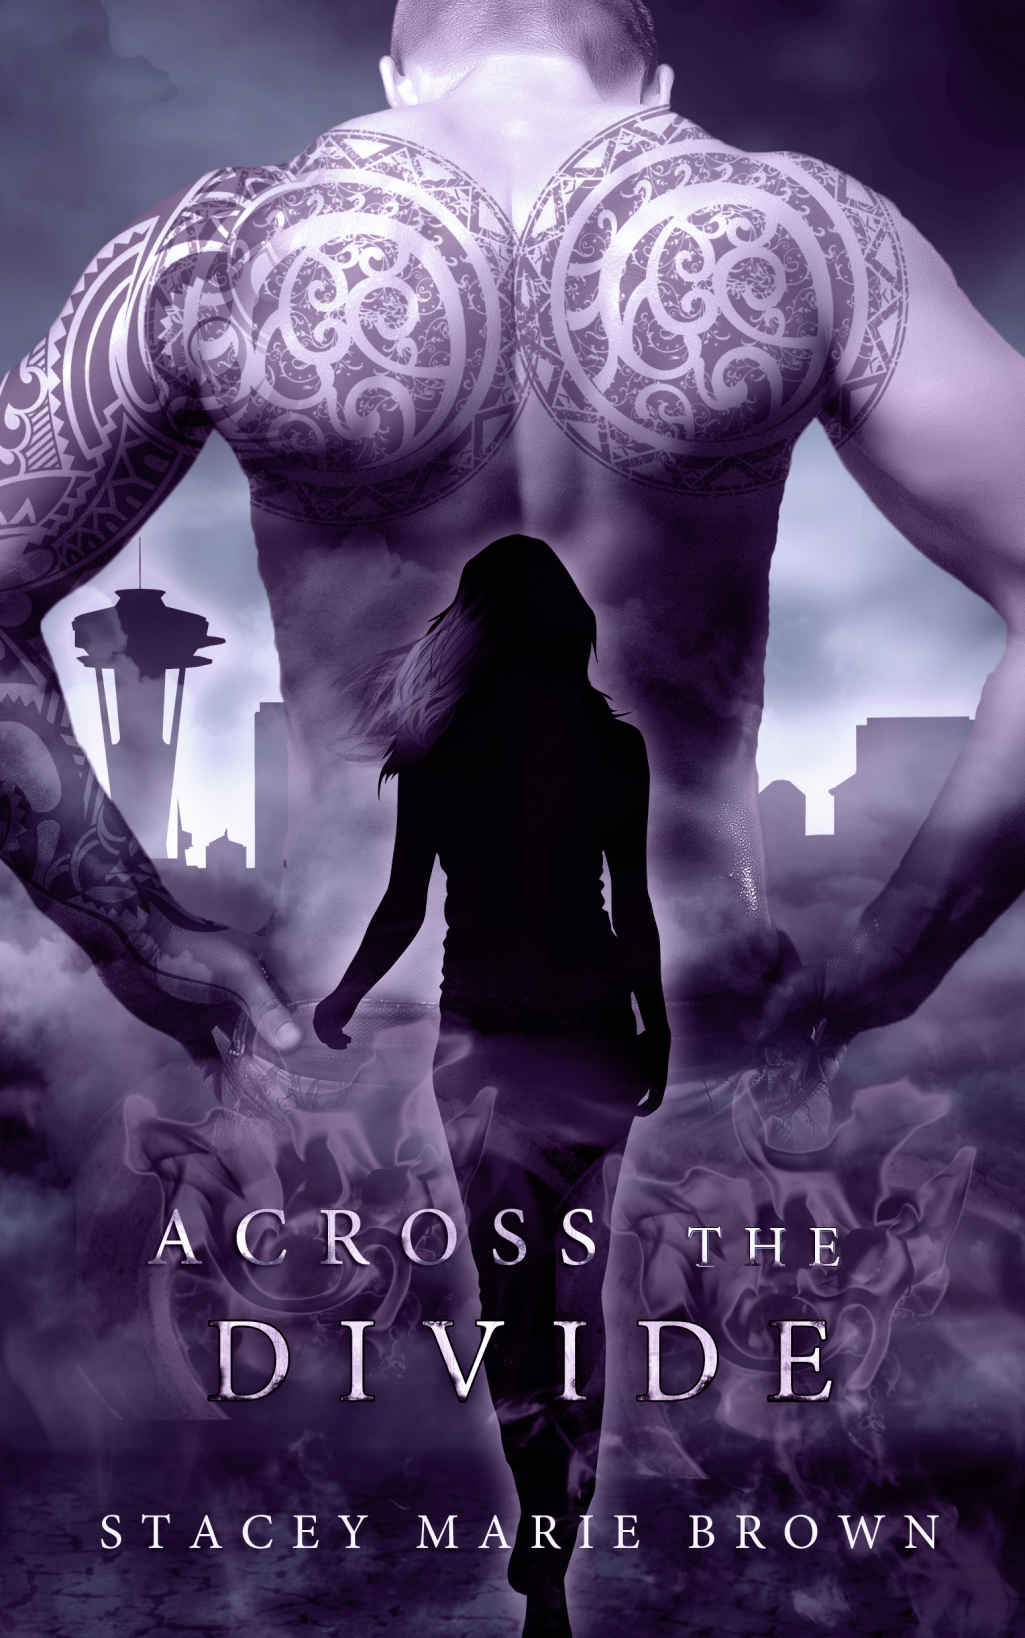 Across The Divide (2015) by Stacey Marie Brown